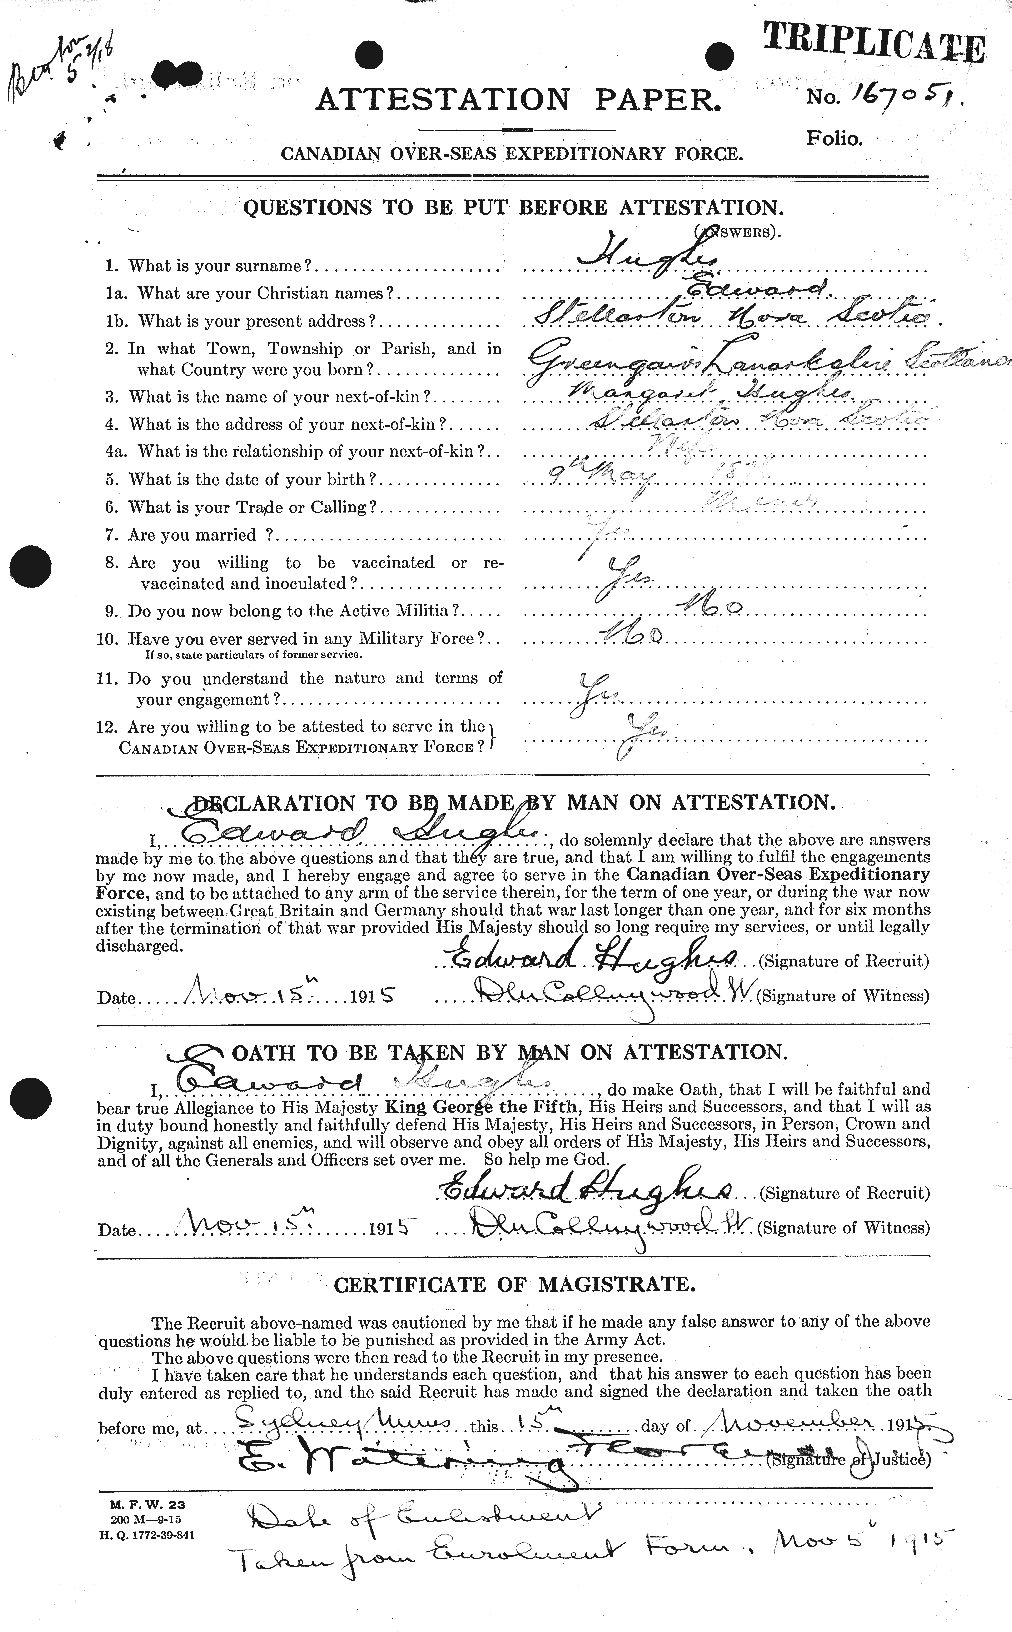 Personnel Records of the First World War - CEF 402669a